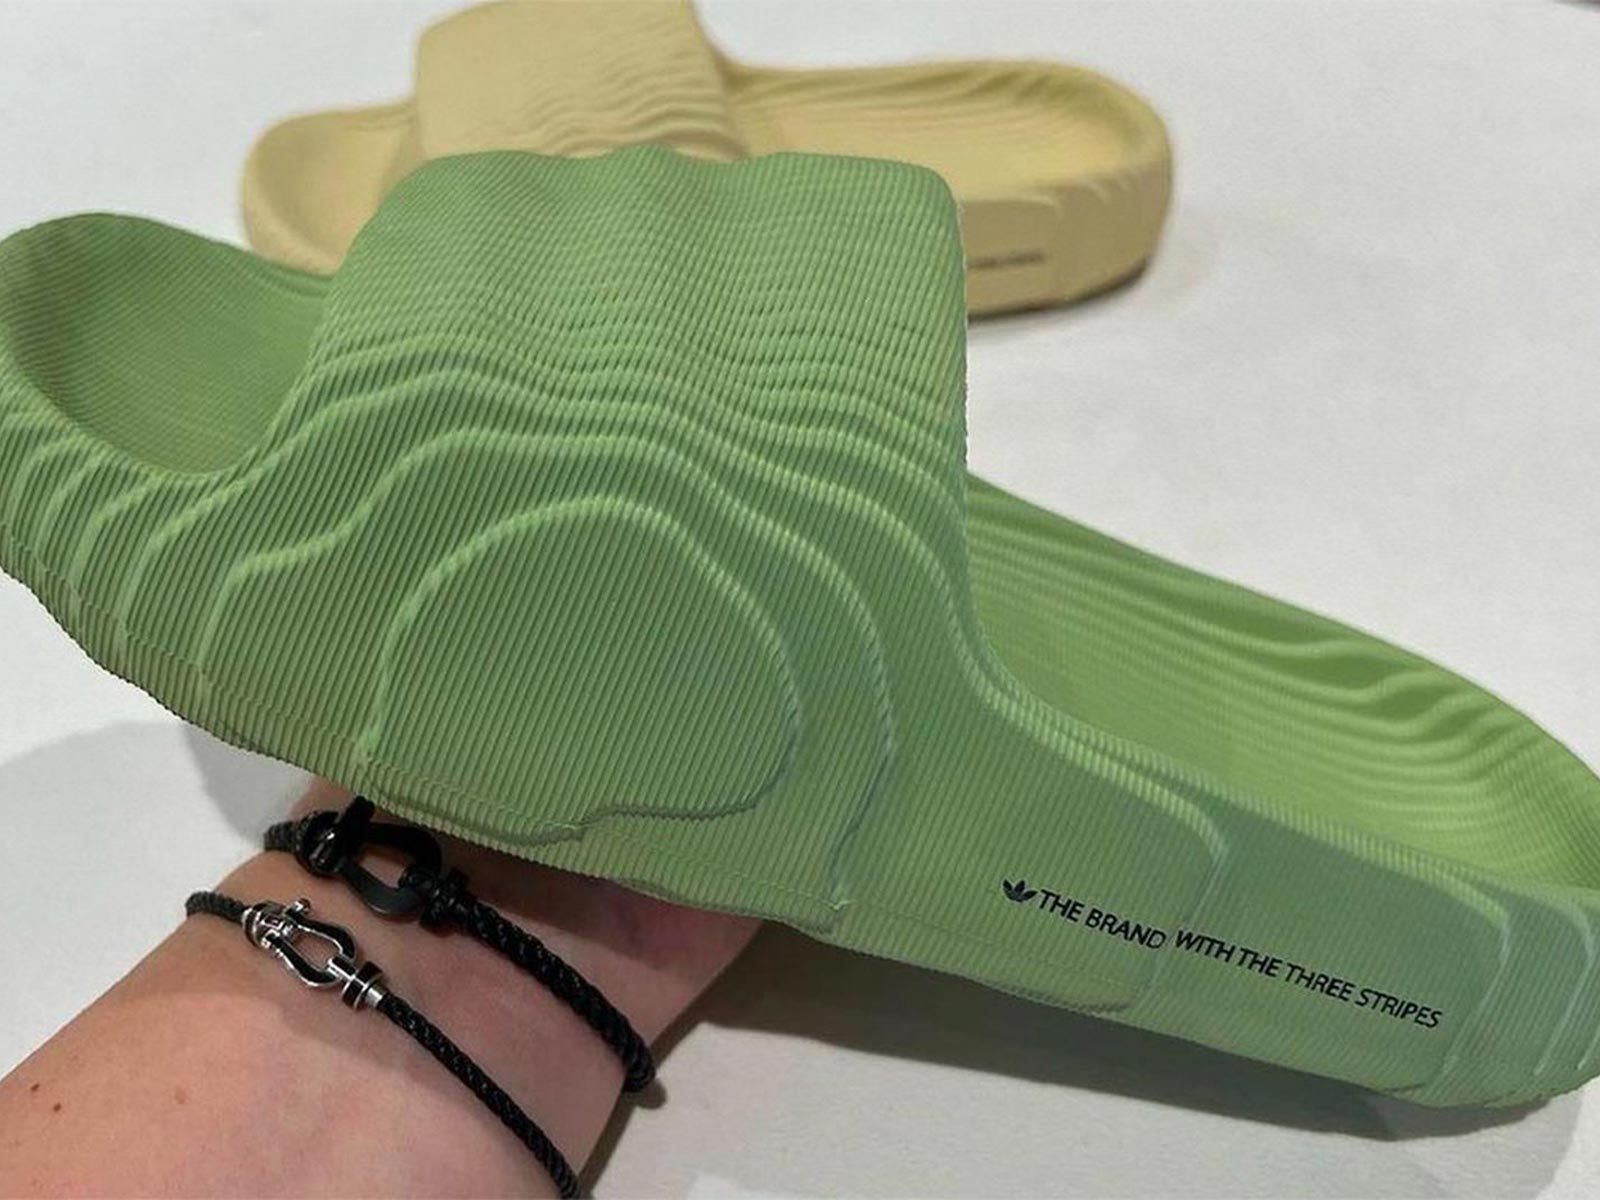 Take a look at the new adidas Adilette 2022